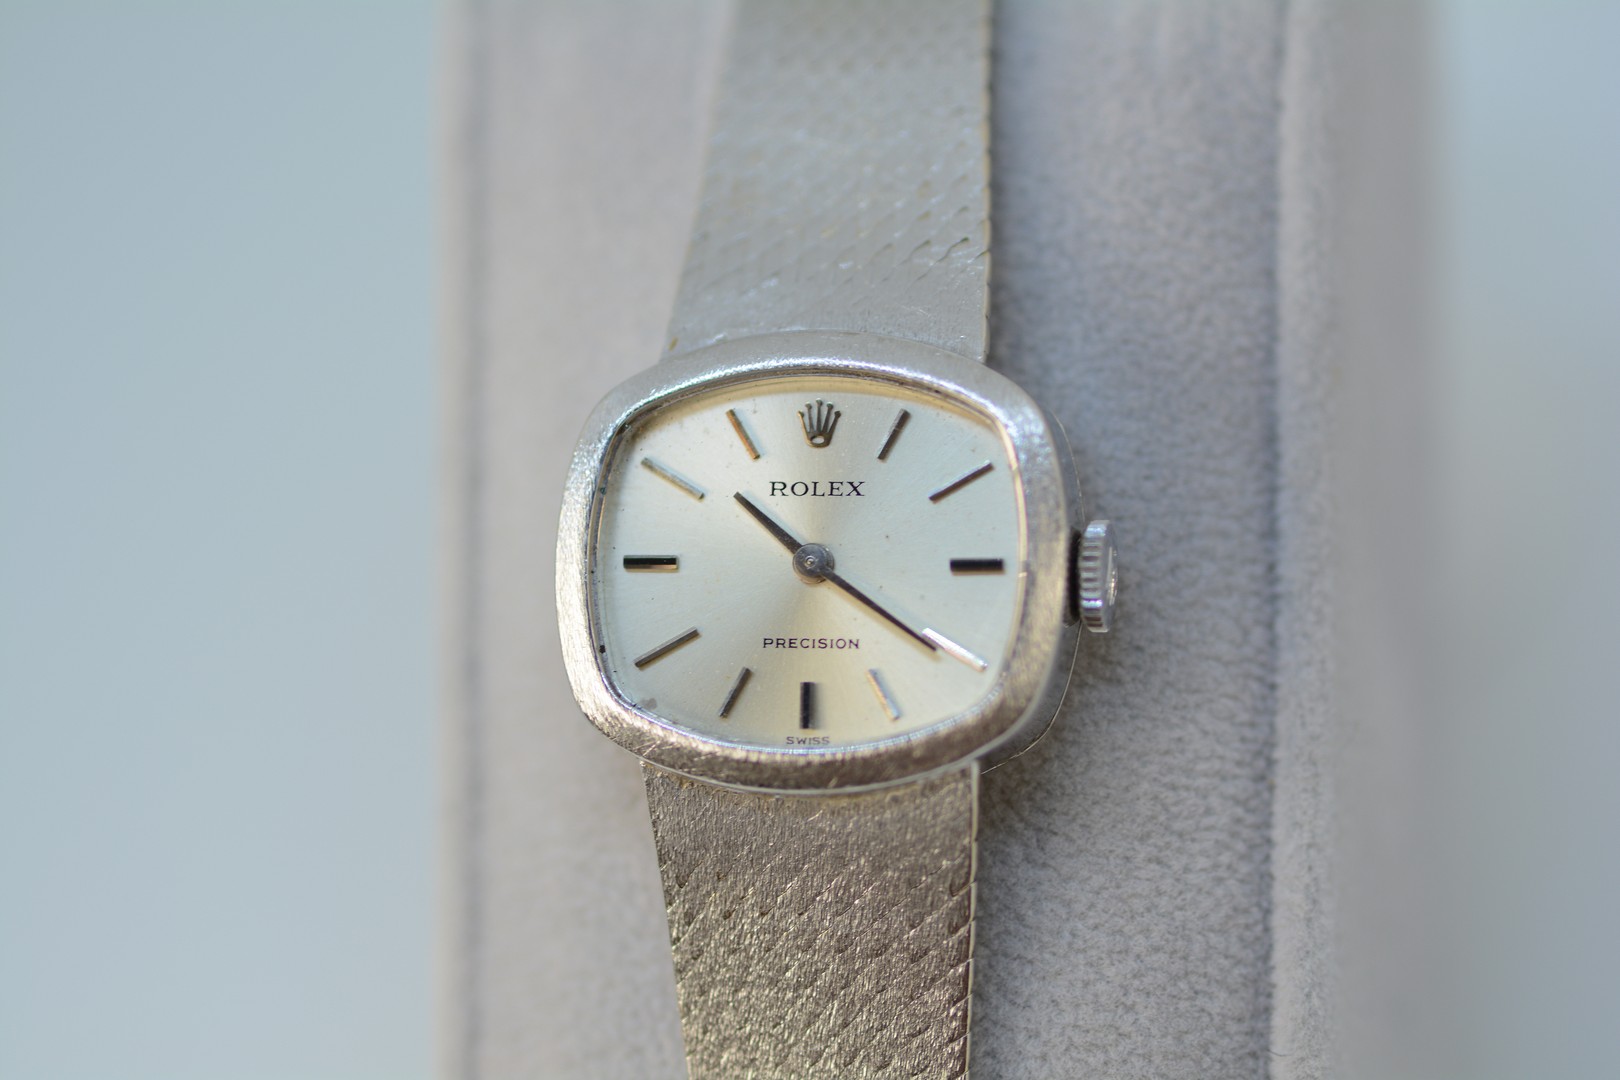 Rolex / Precision - Lady's White Gold Wristwatch - Image 6 of 13